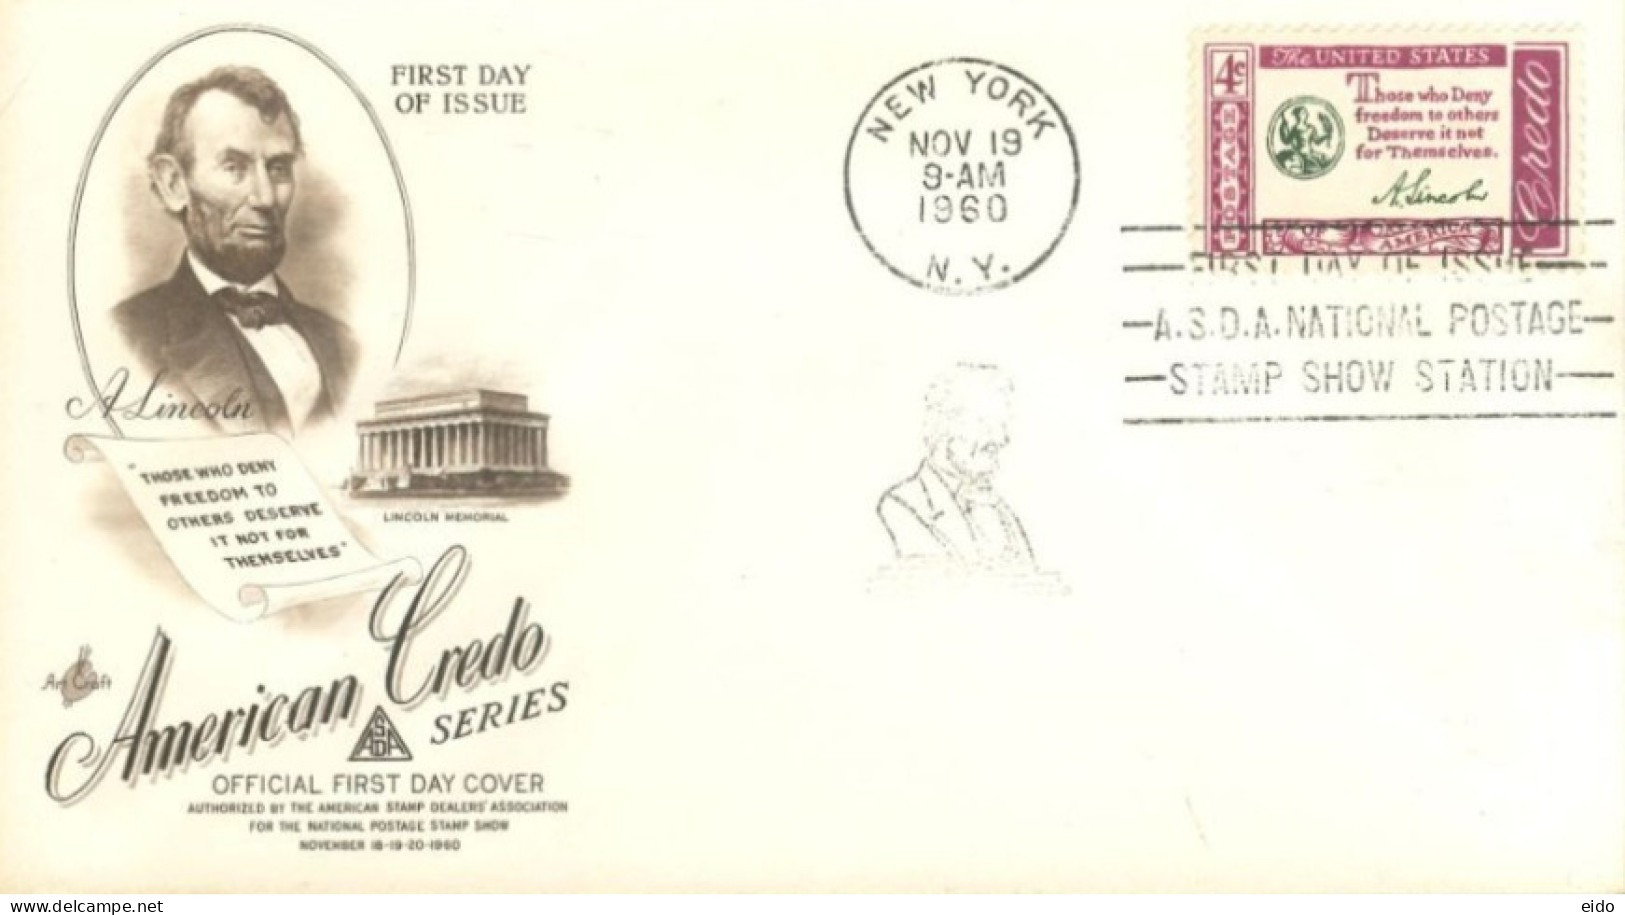 UNITED STATES. - 1966 - FDC STAMP OF AMERICAN CREDO. - Covers & Documents